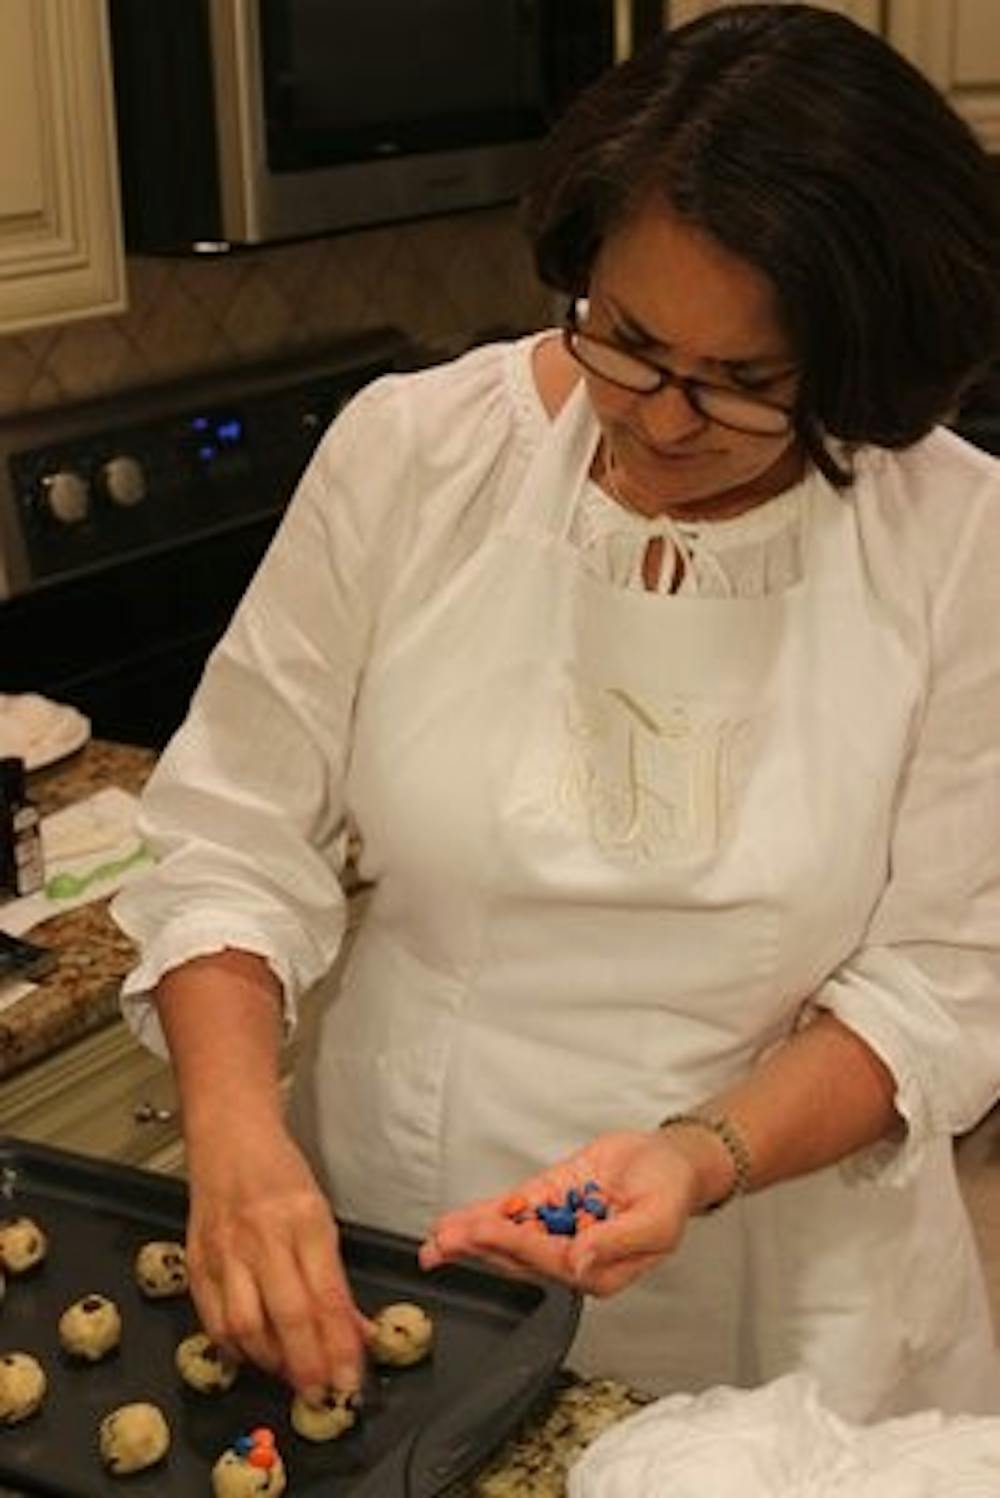 Cindy Thrash decorates homemade cookies with orange and blue candies. (Nickolaus Hines | Community Reporter)